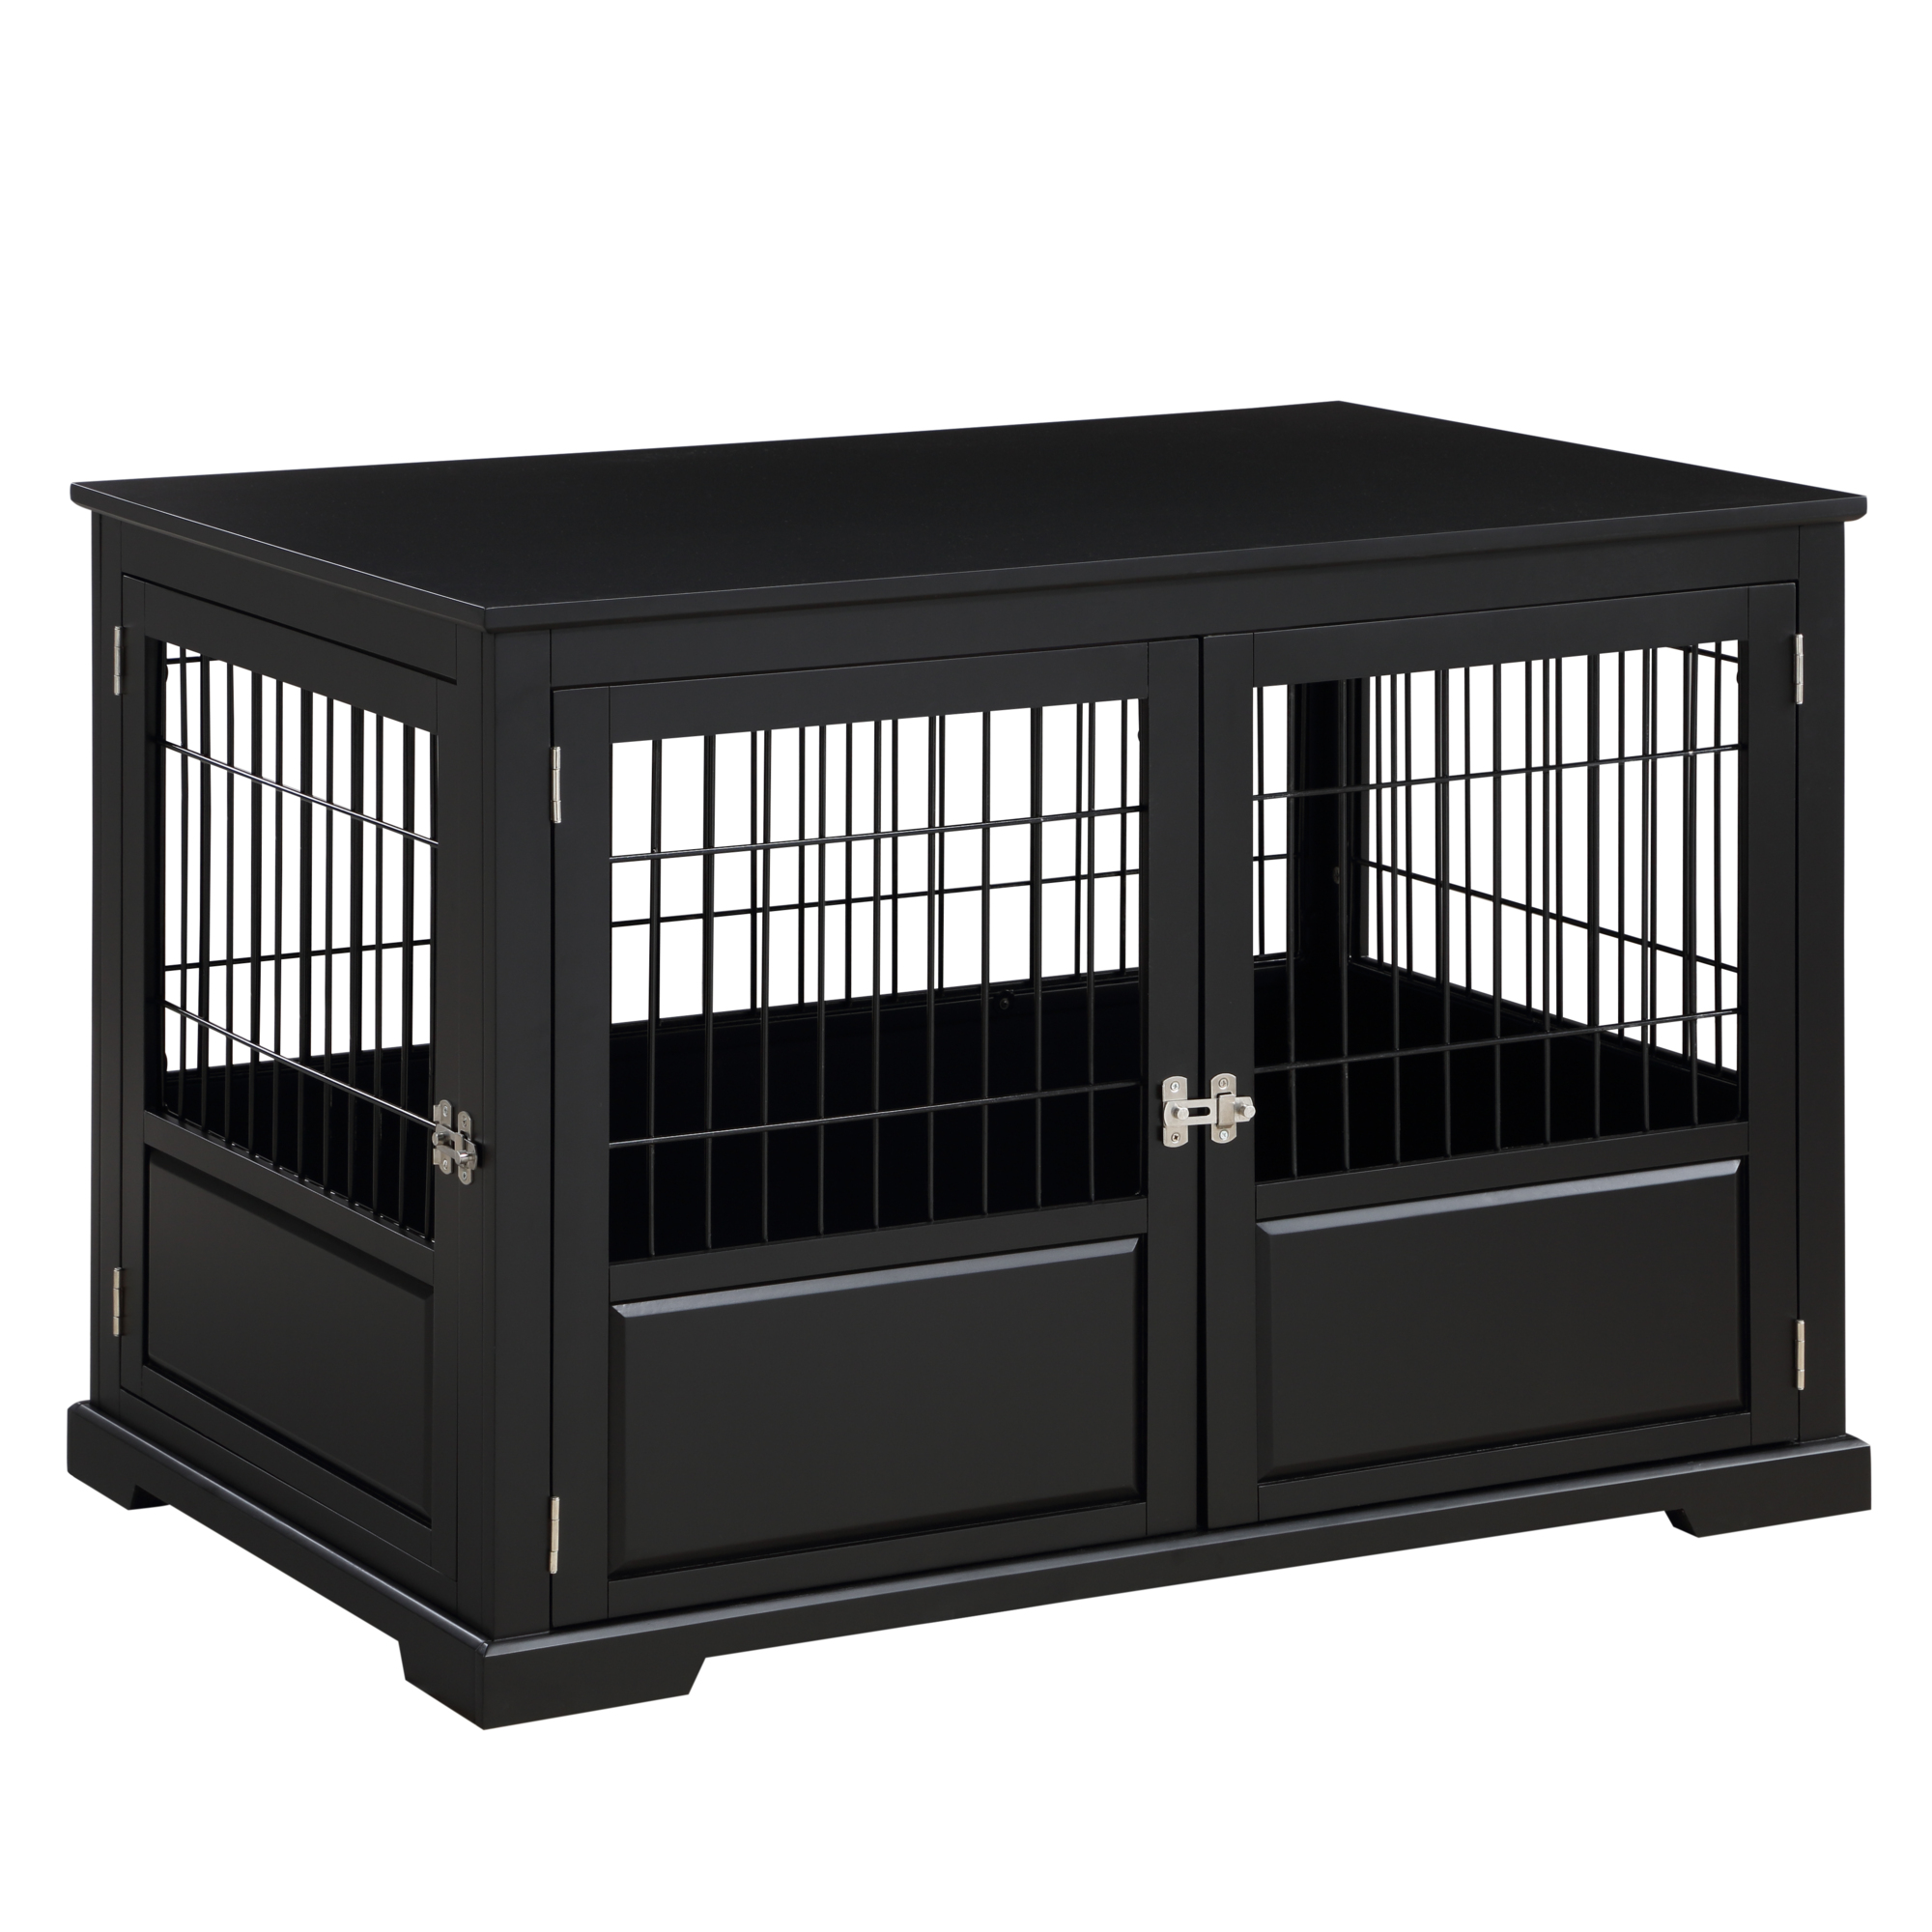 Merry Products, Fairview Triple Door Crate, Large, Black, Model PTH1082021700